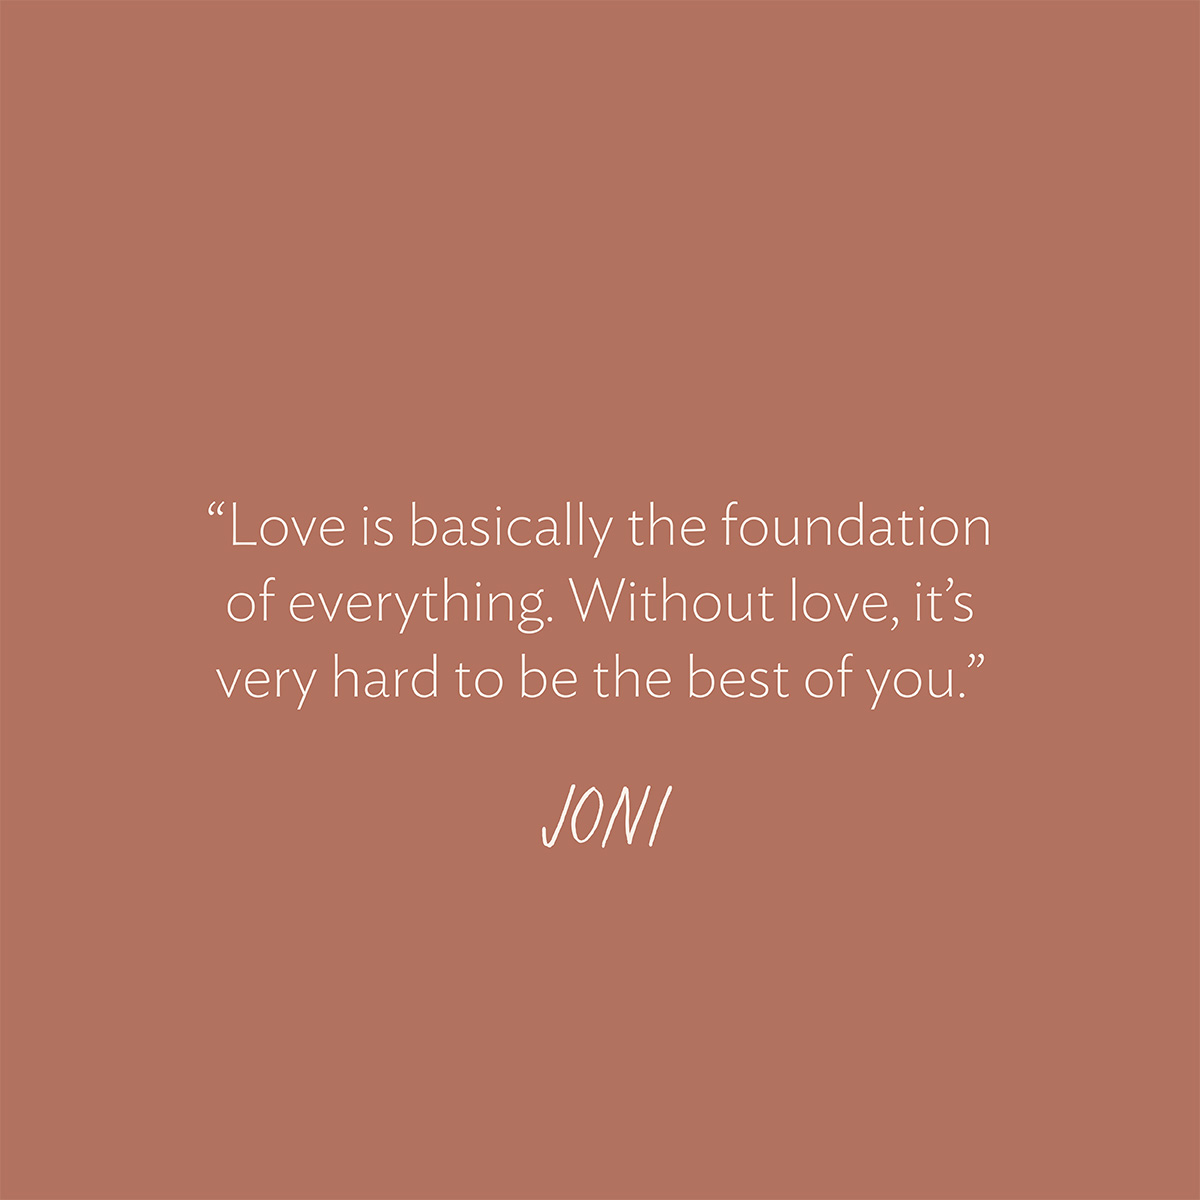 “Love is basically the foundation of everything. Without love, it’s very hard to be the best of you.” - Joni